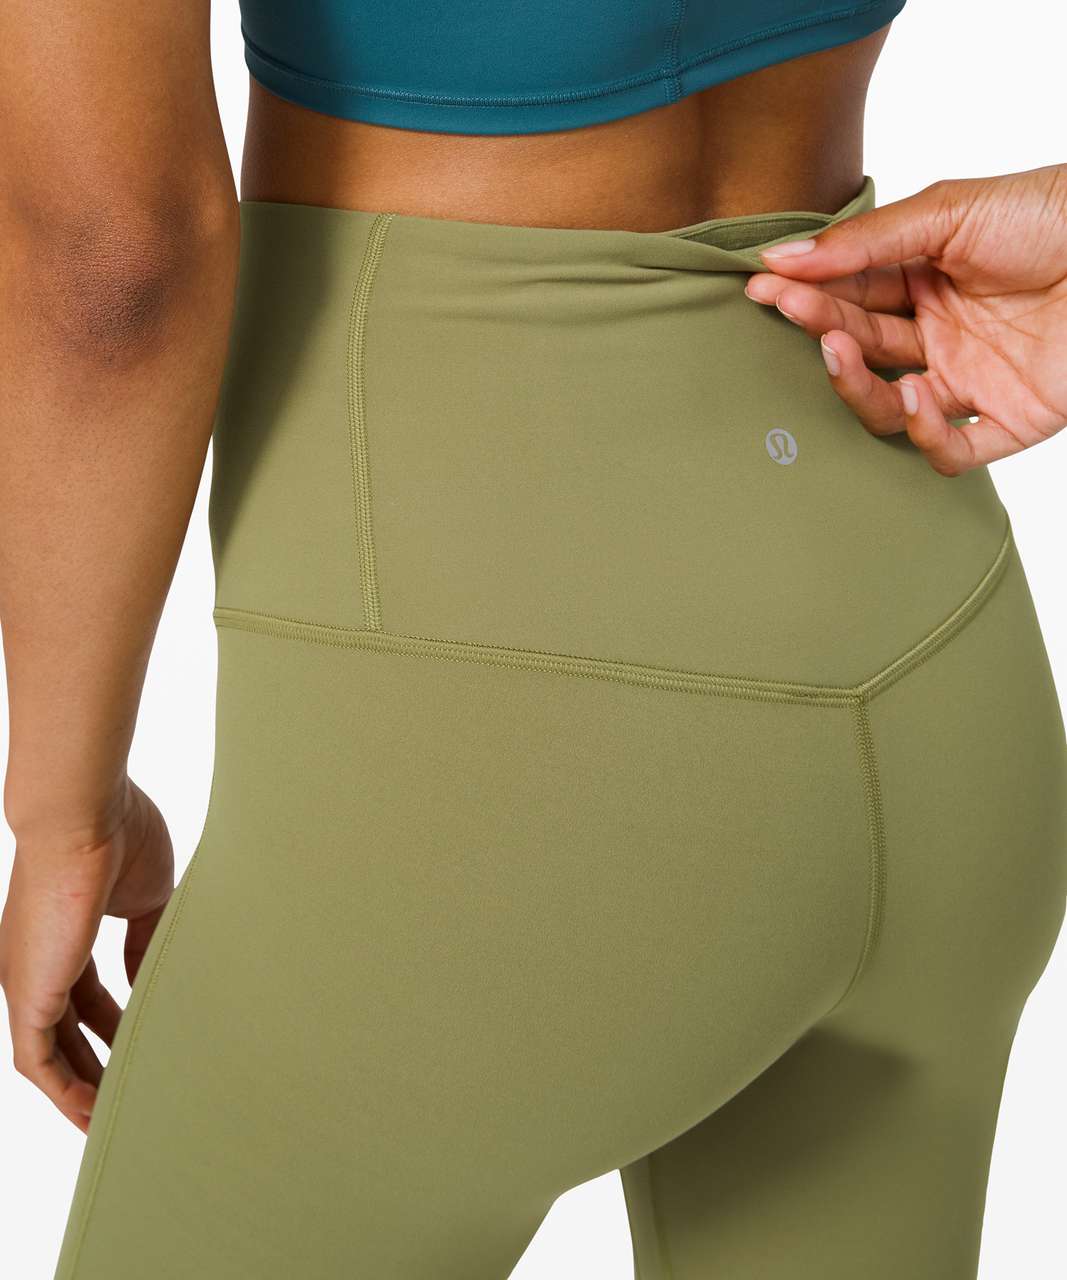 Lululemon Size 18 Align HR Pant Tight 25” Nulu Rosemary Green RSMG NWT  Naked